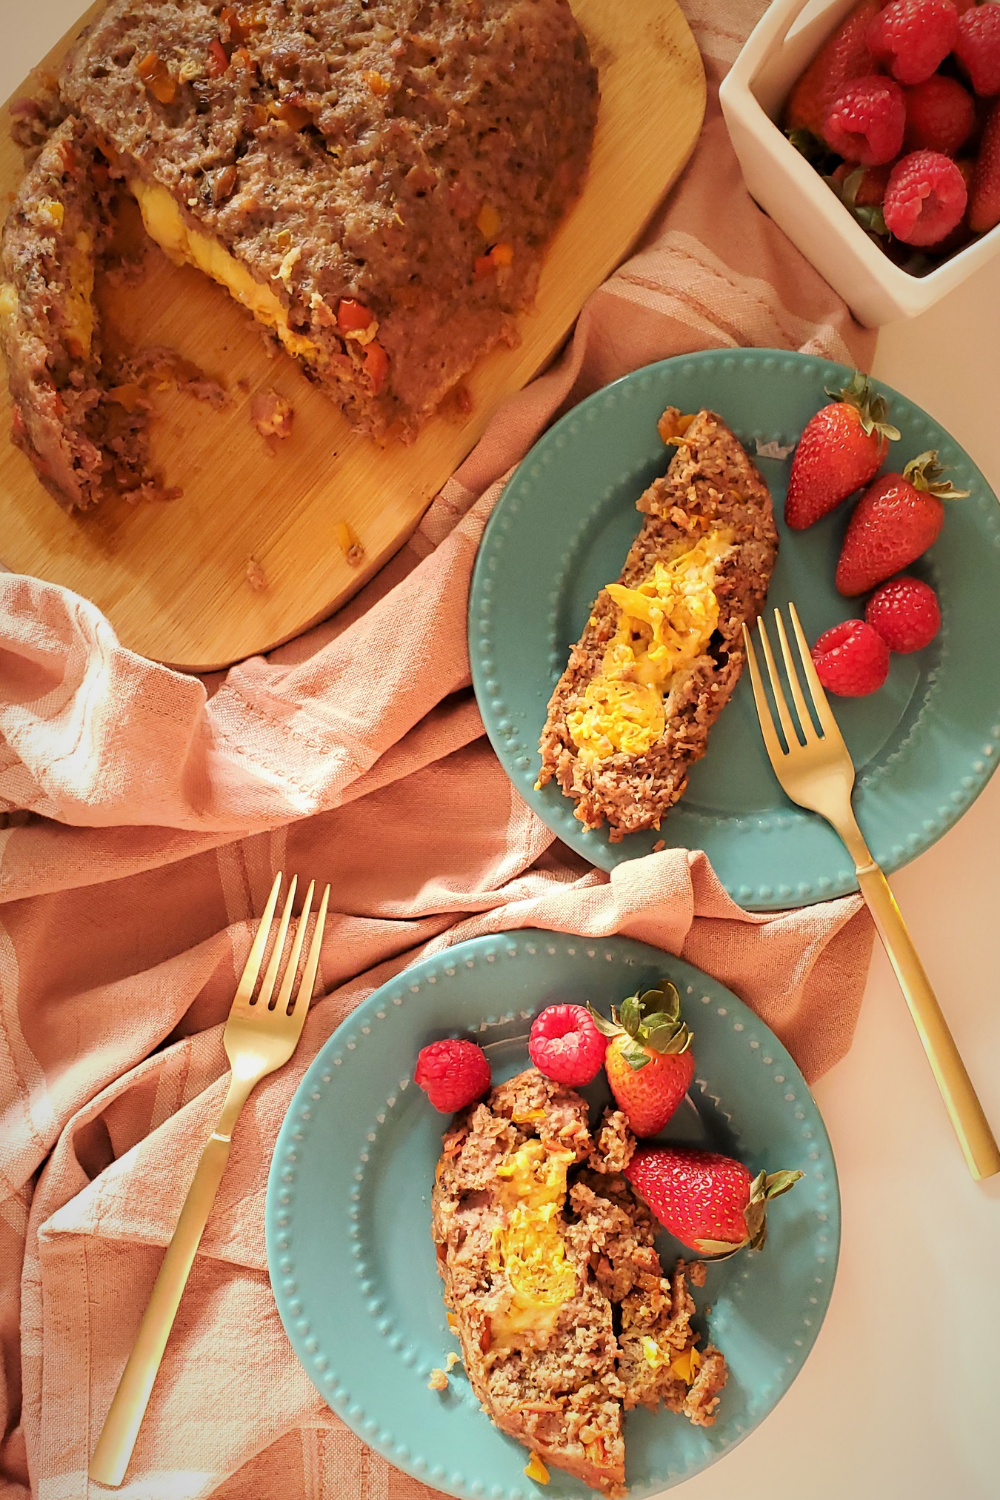 LOW CARB KETO BREAKFAST MEATLOAF WITH PORK RINDS